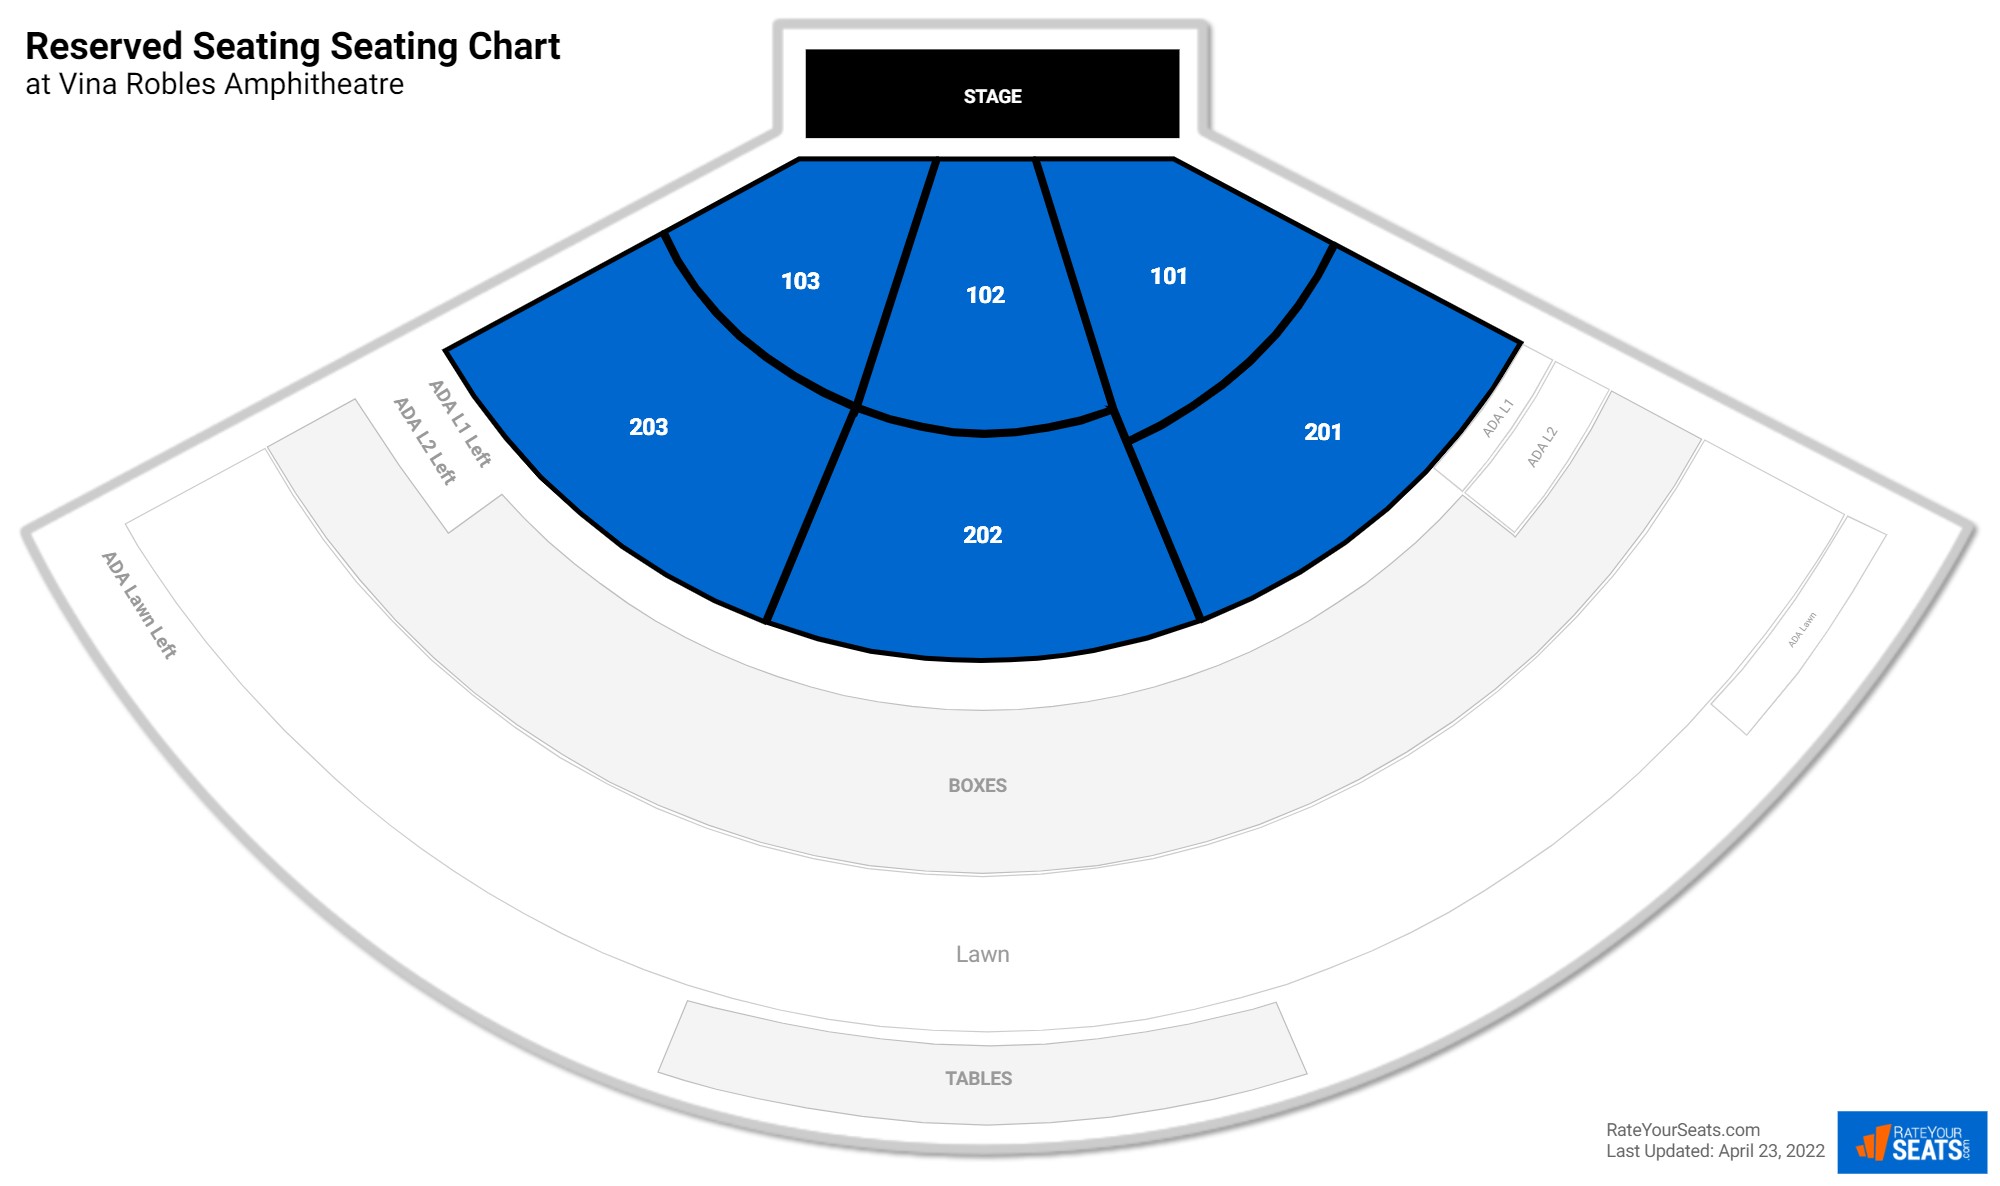 Concert Reserved Seating Seating Chart at Vina Robles Amphitheatre